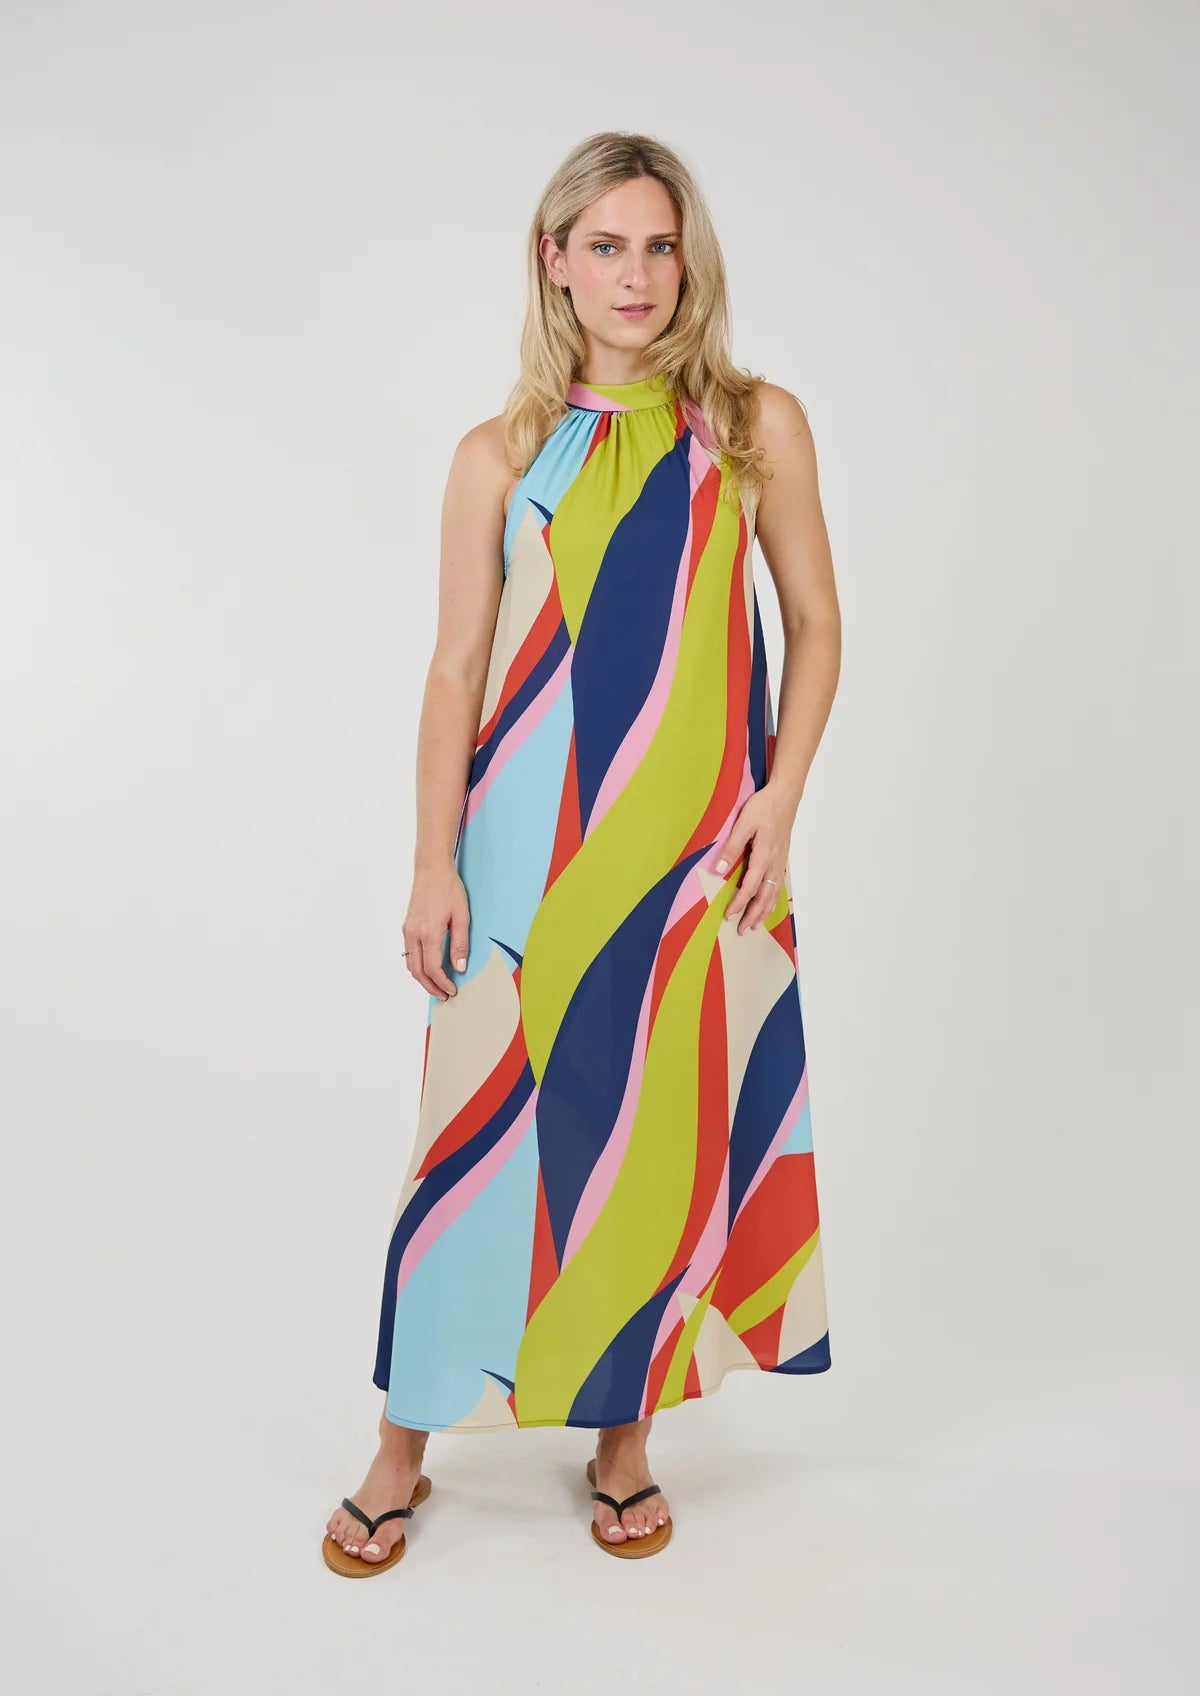 Striking sleeveless maxi dress in a bold & vibrant wave print, by Shannon Passero.  This dress features a button closure up the entire back and pockets!